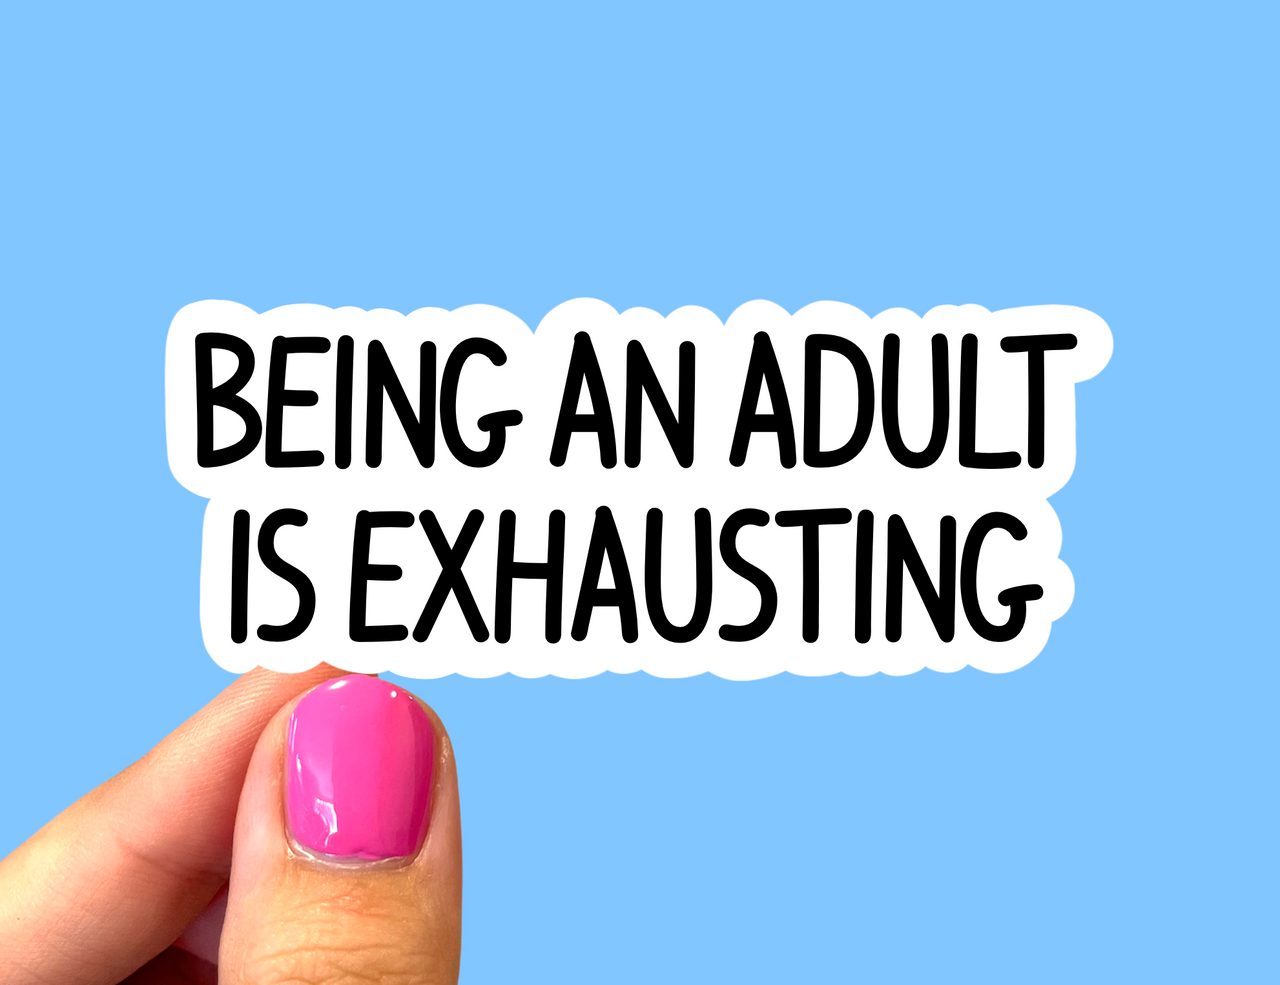 Being an adult is exhausting